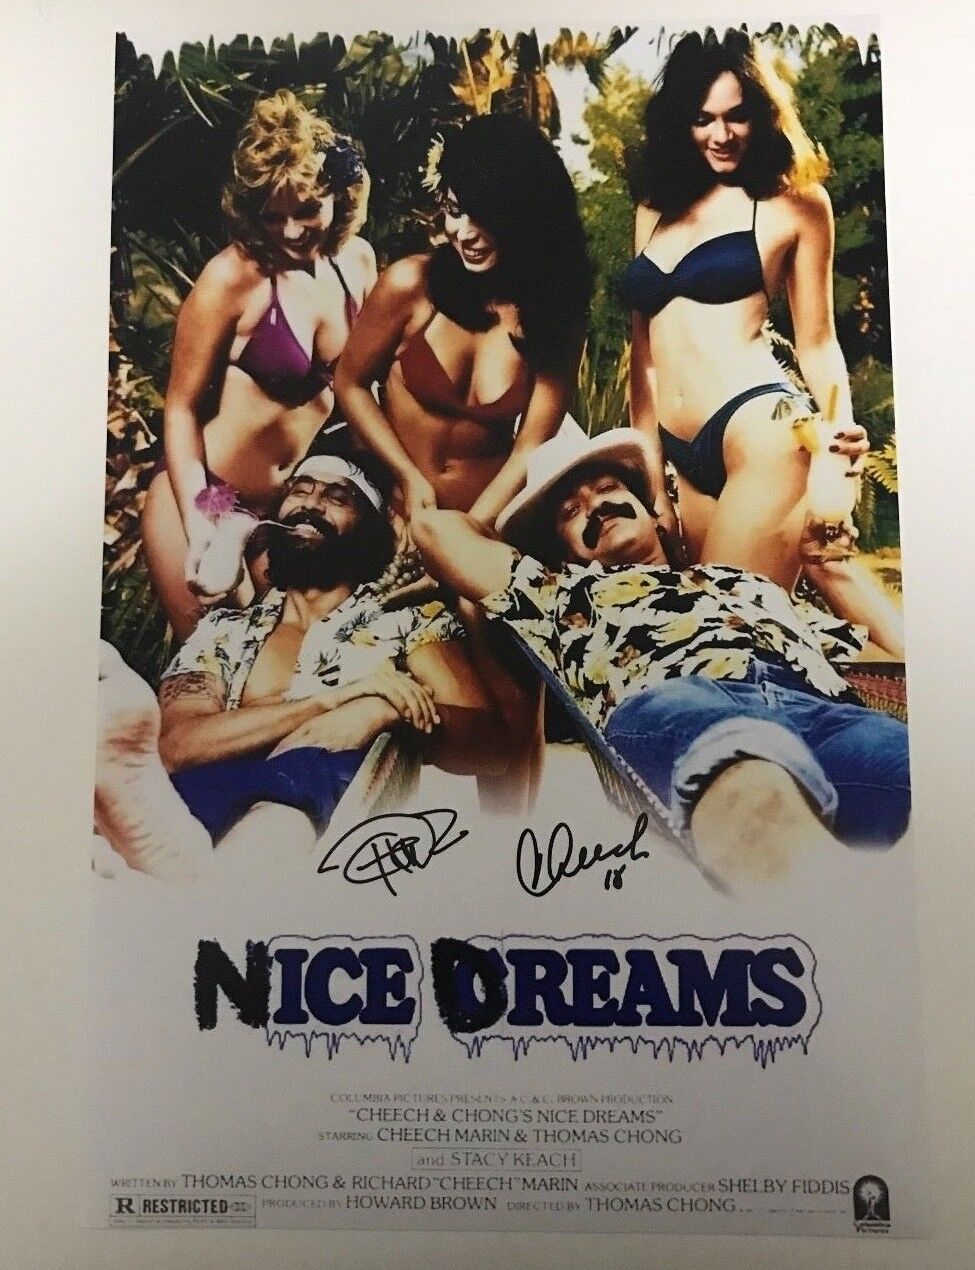 * CHEECH & CHONG'S * signed 12x18 movie Photo Poster painting poster * NICE DREAMS * PROOF 1